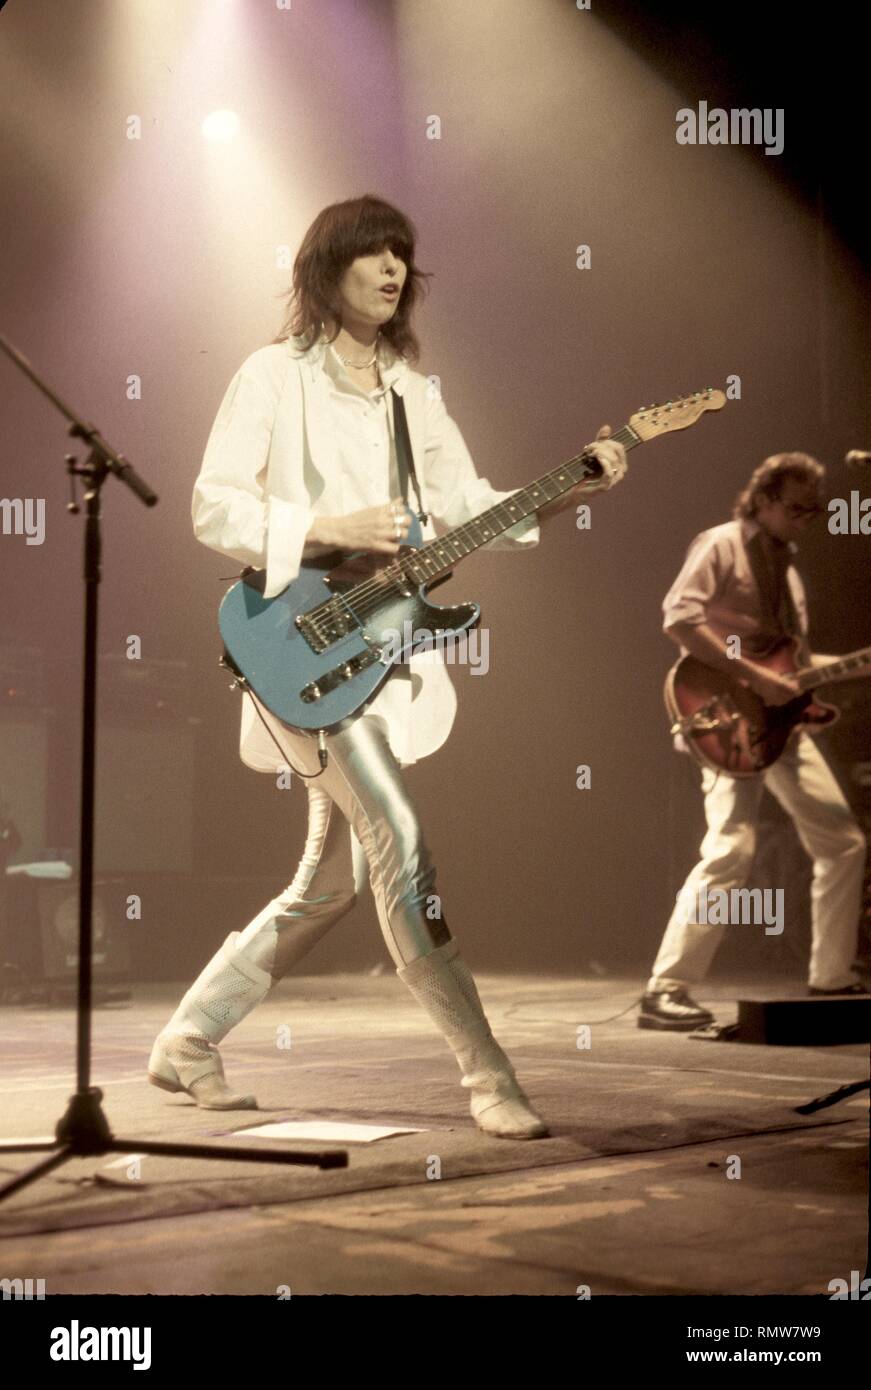 SInger, songwriter & guitarist Chrissie Hynde of British rock band The Pretenders is shown performing on stage during a 'live' concert appearance. Stock Photo